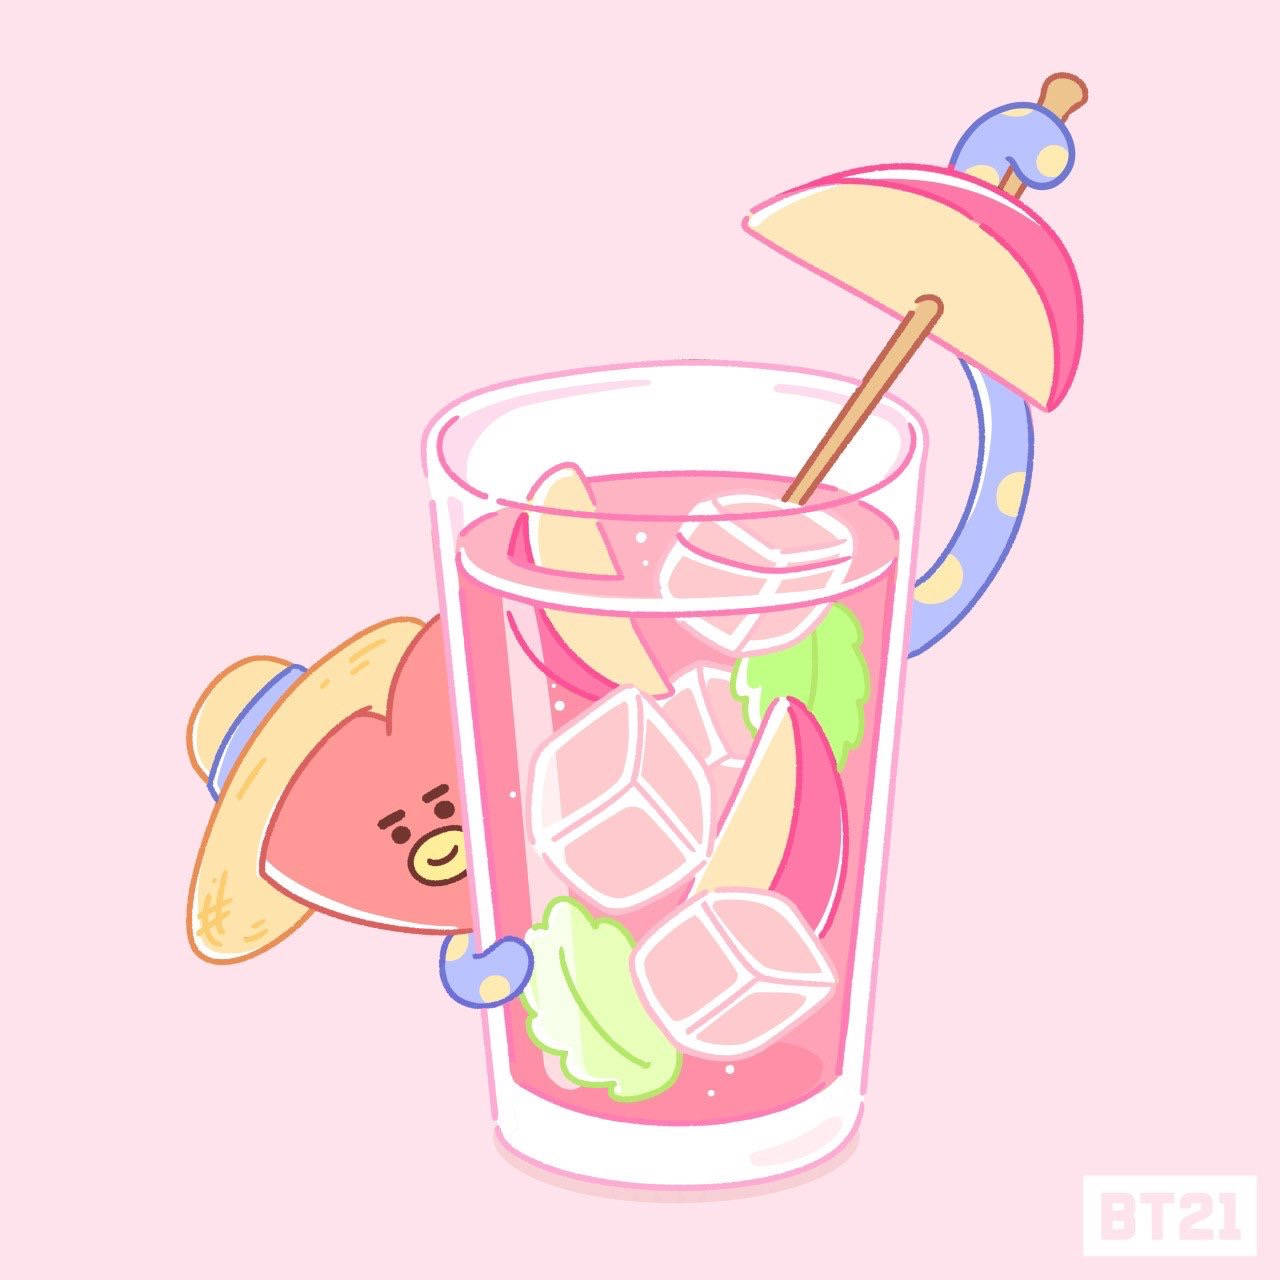 Bt21 1280X1280 Wallpaper and Background Image